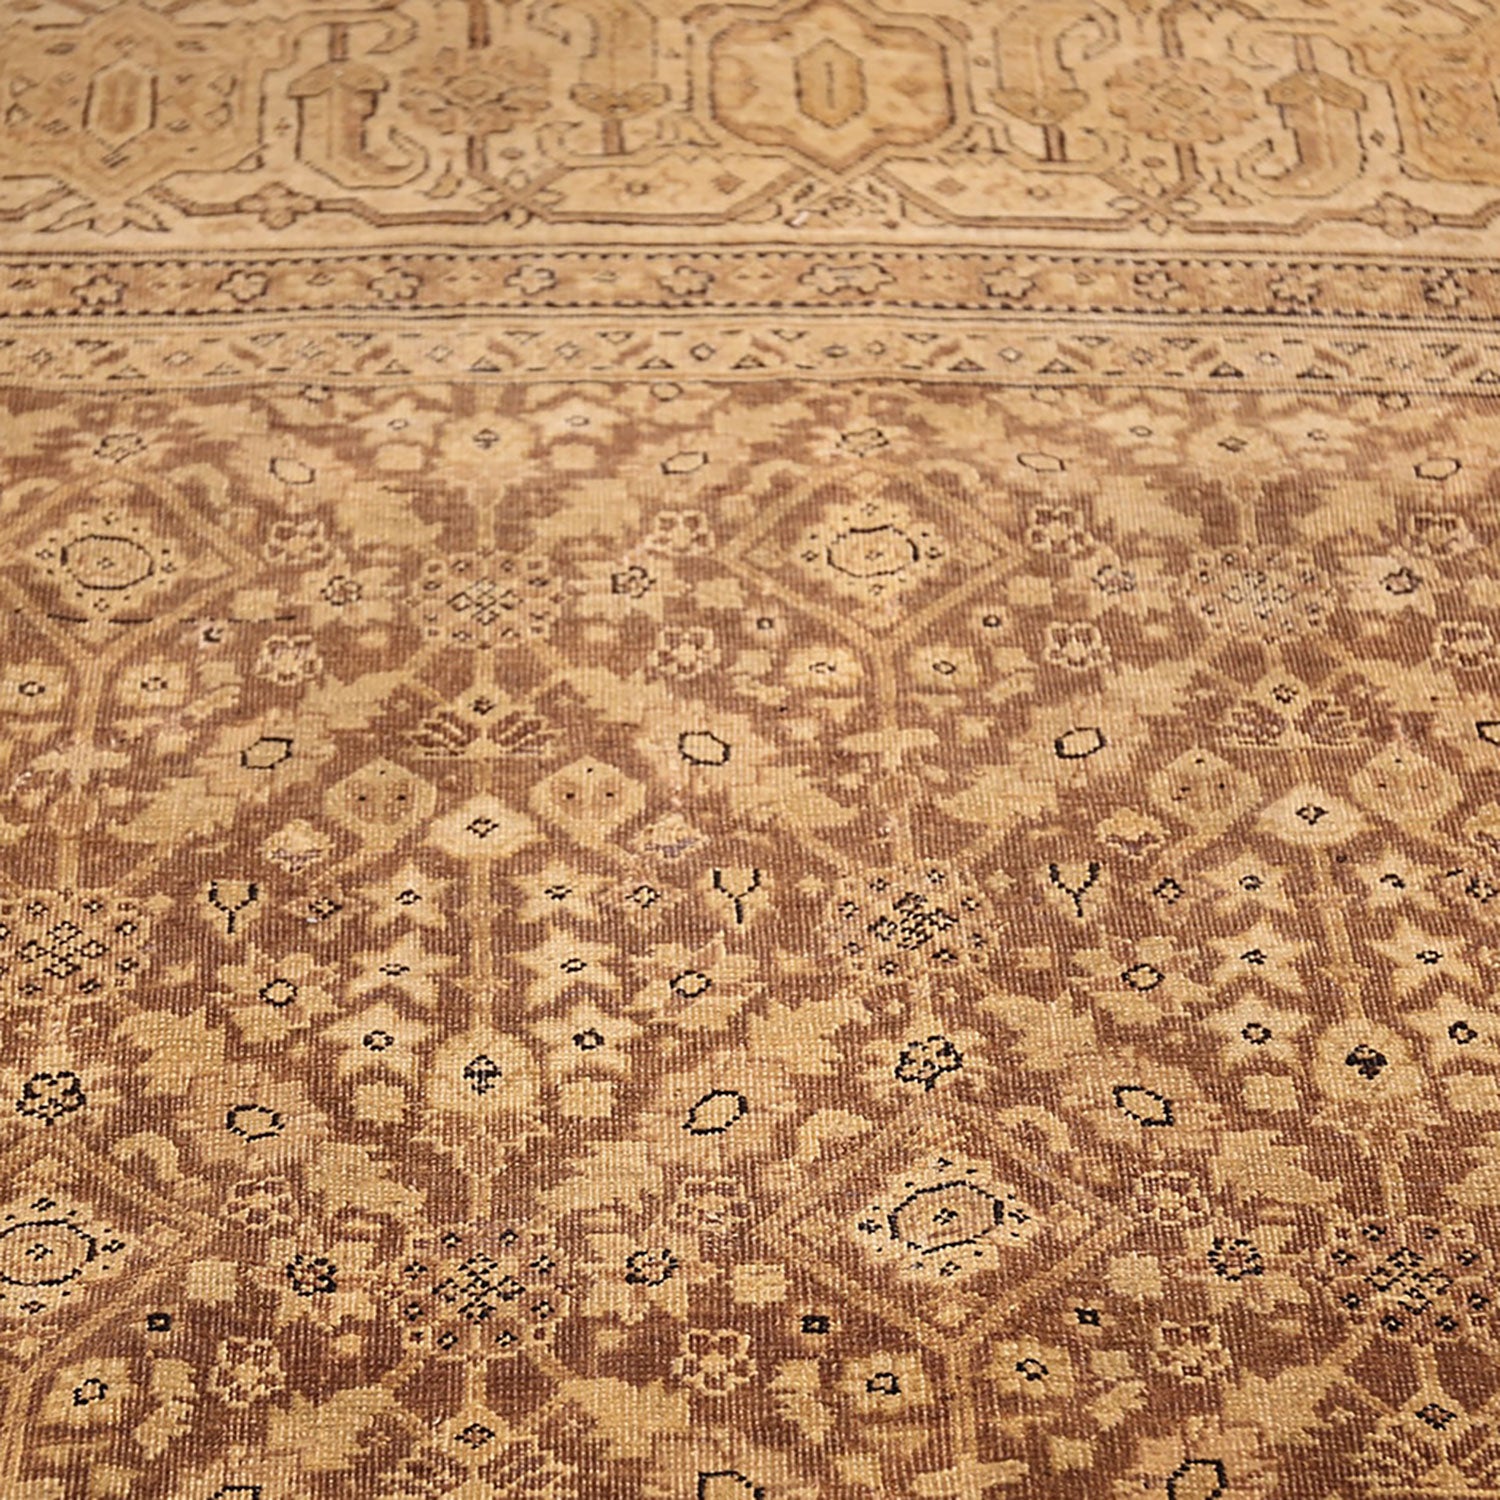 Intricate symmetrical rug design with earthy tones and geometric shapes.